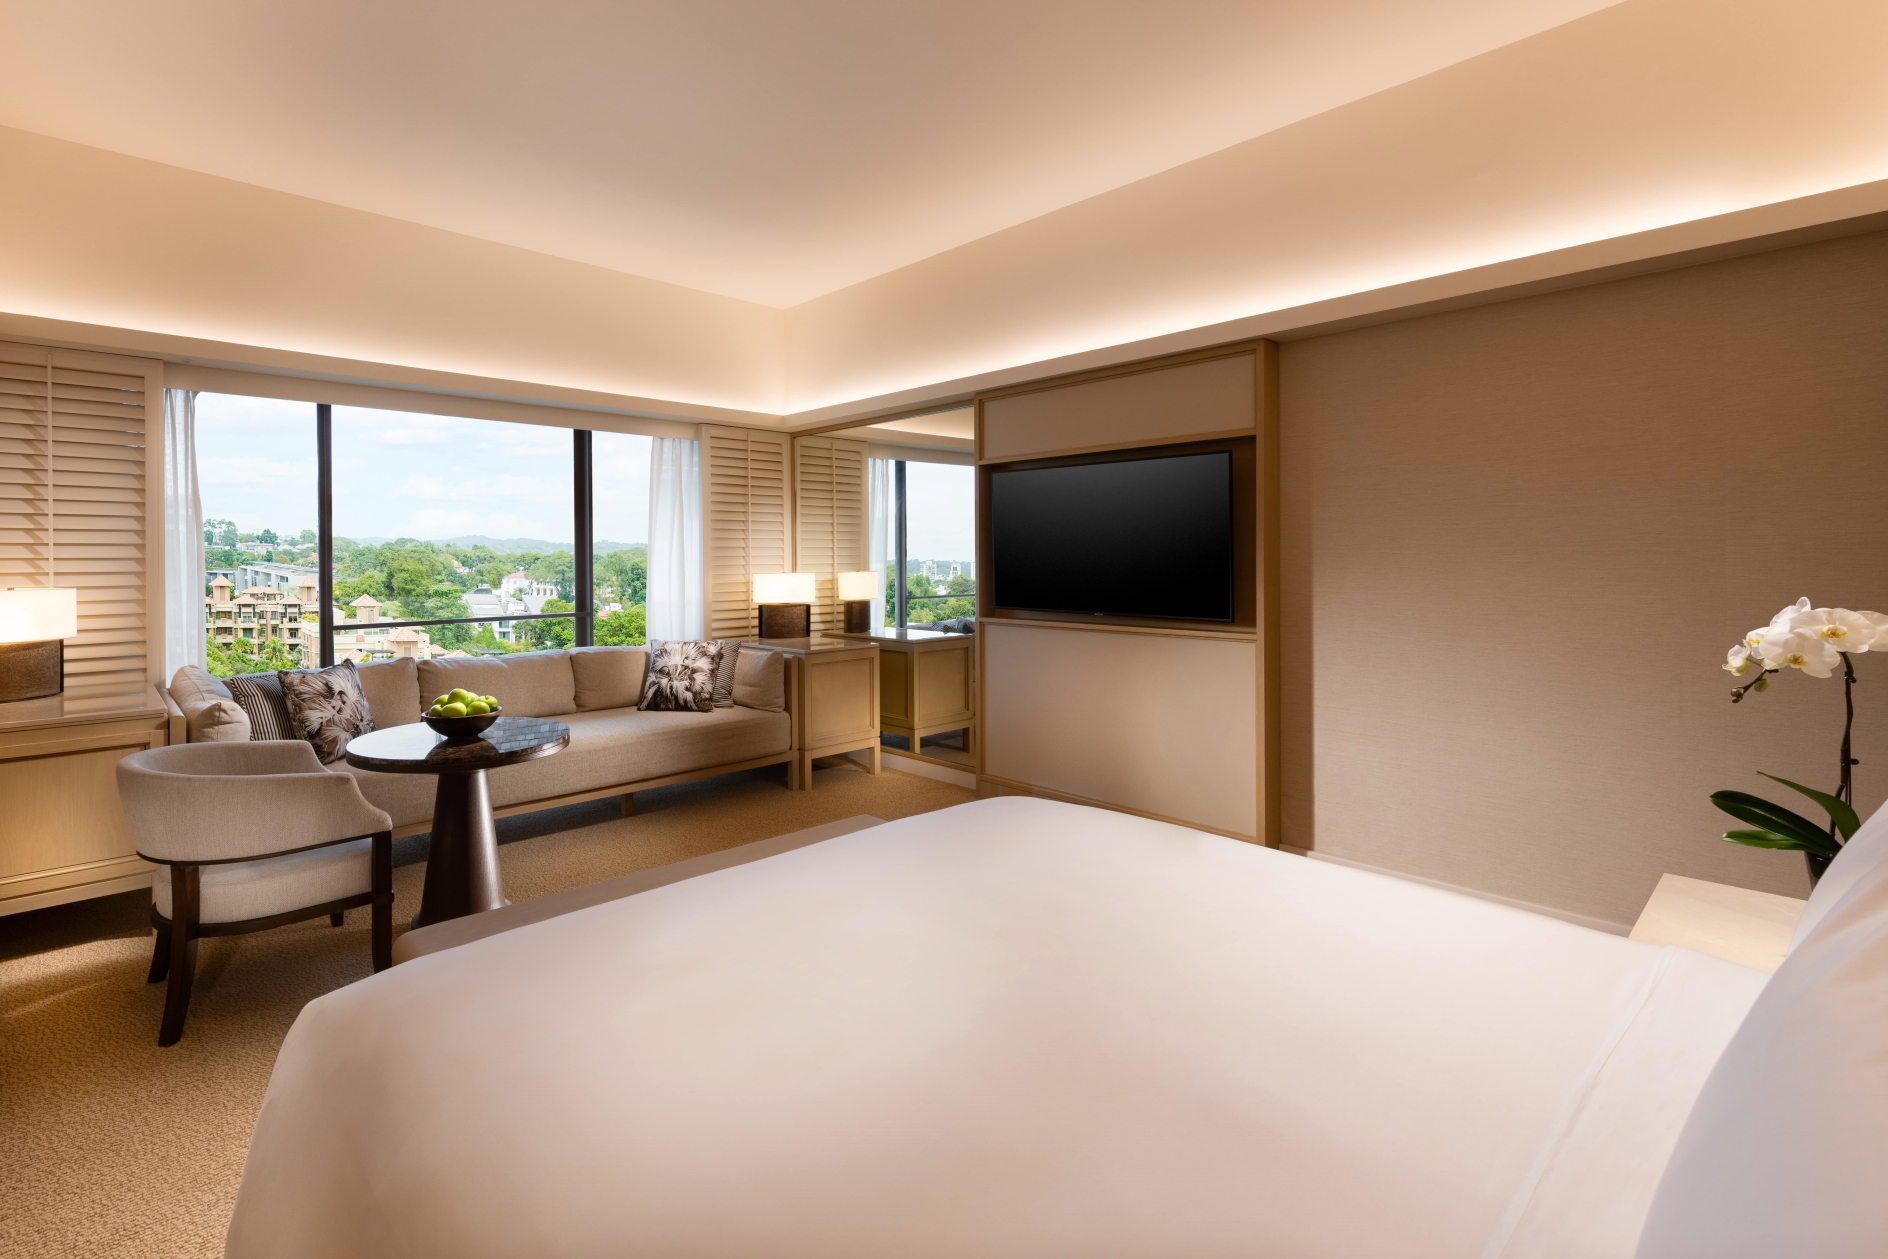 Room at Conrad Singapore Orchard. Click to enlarge.